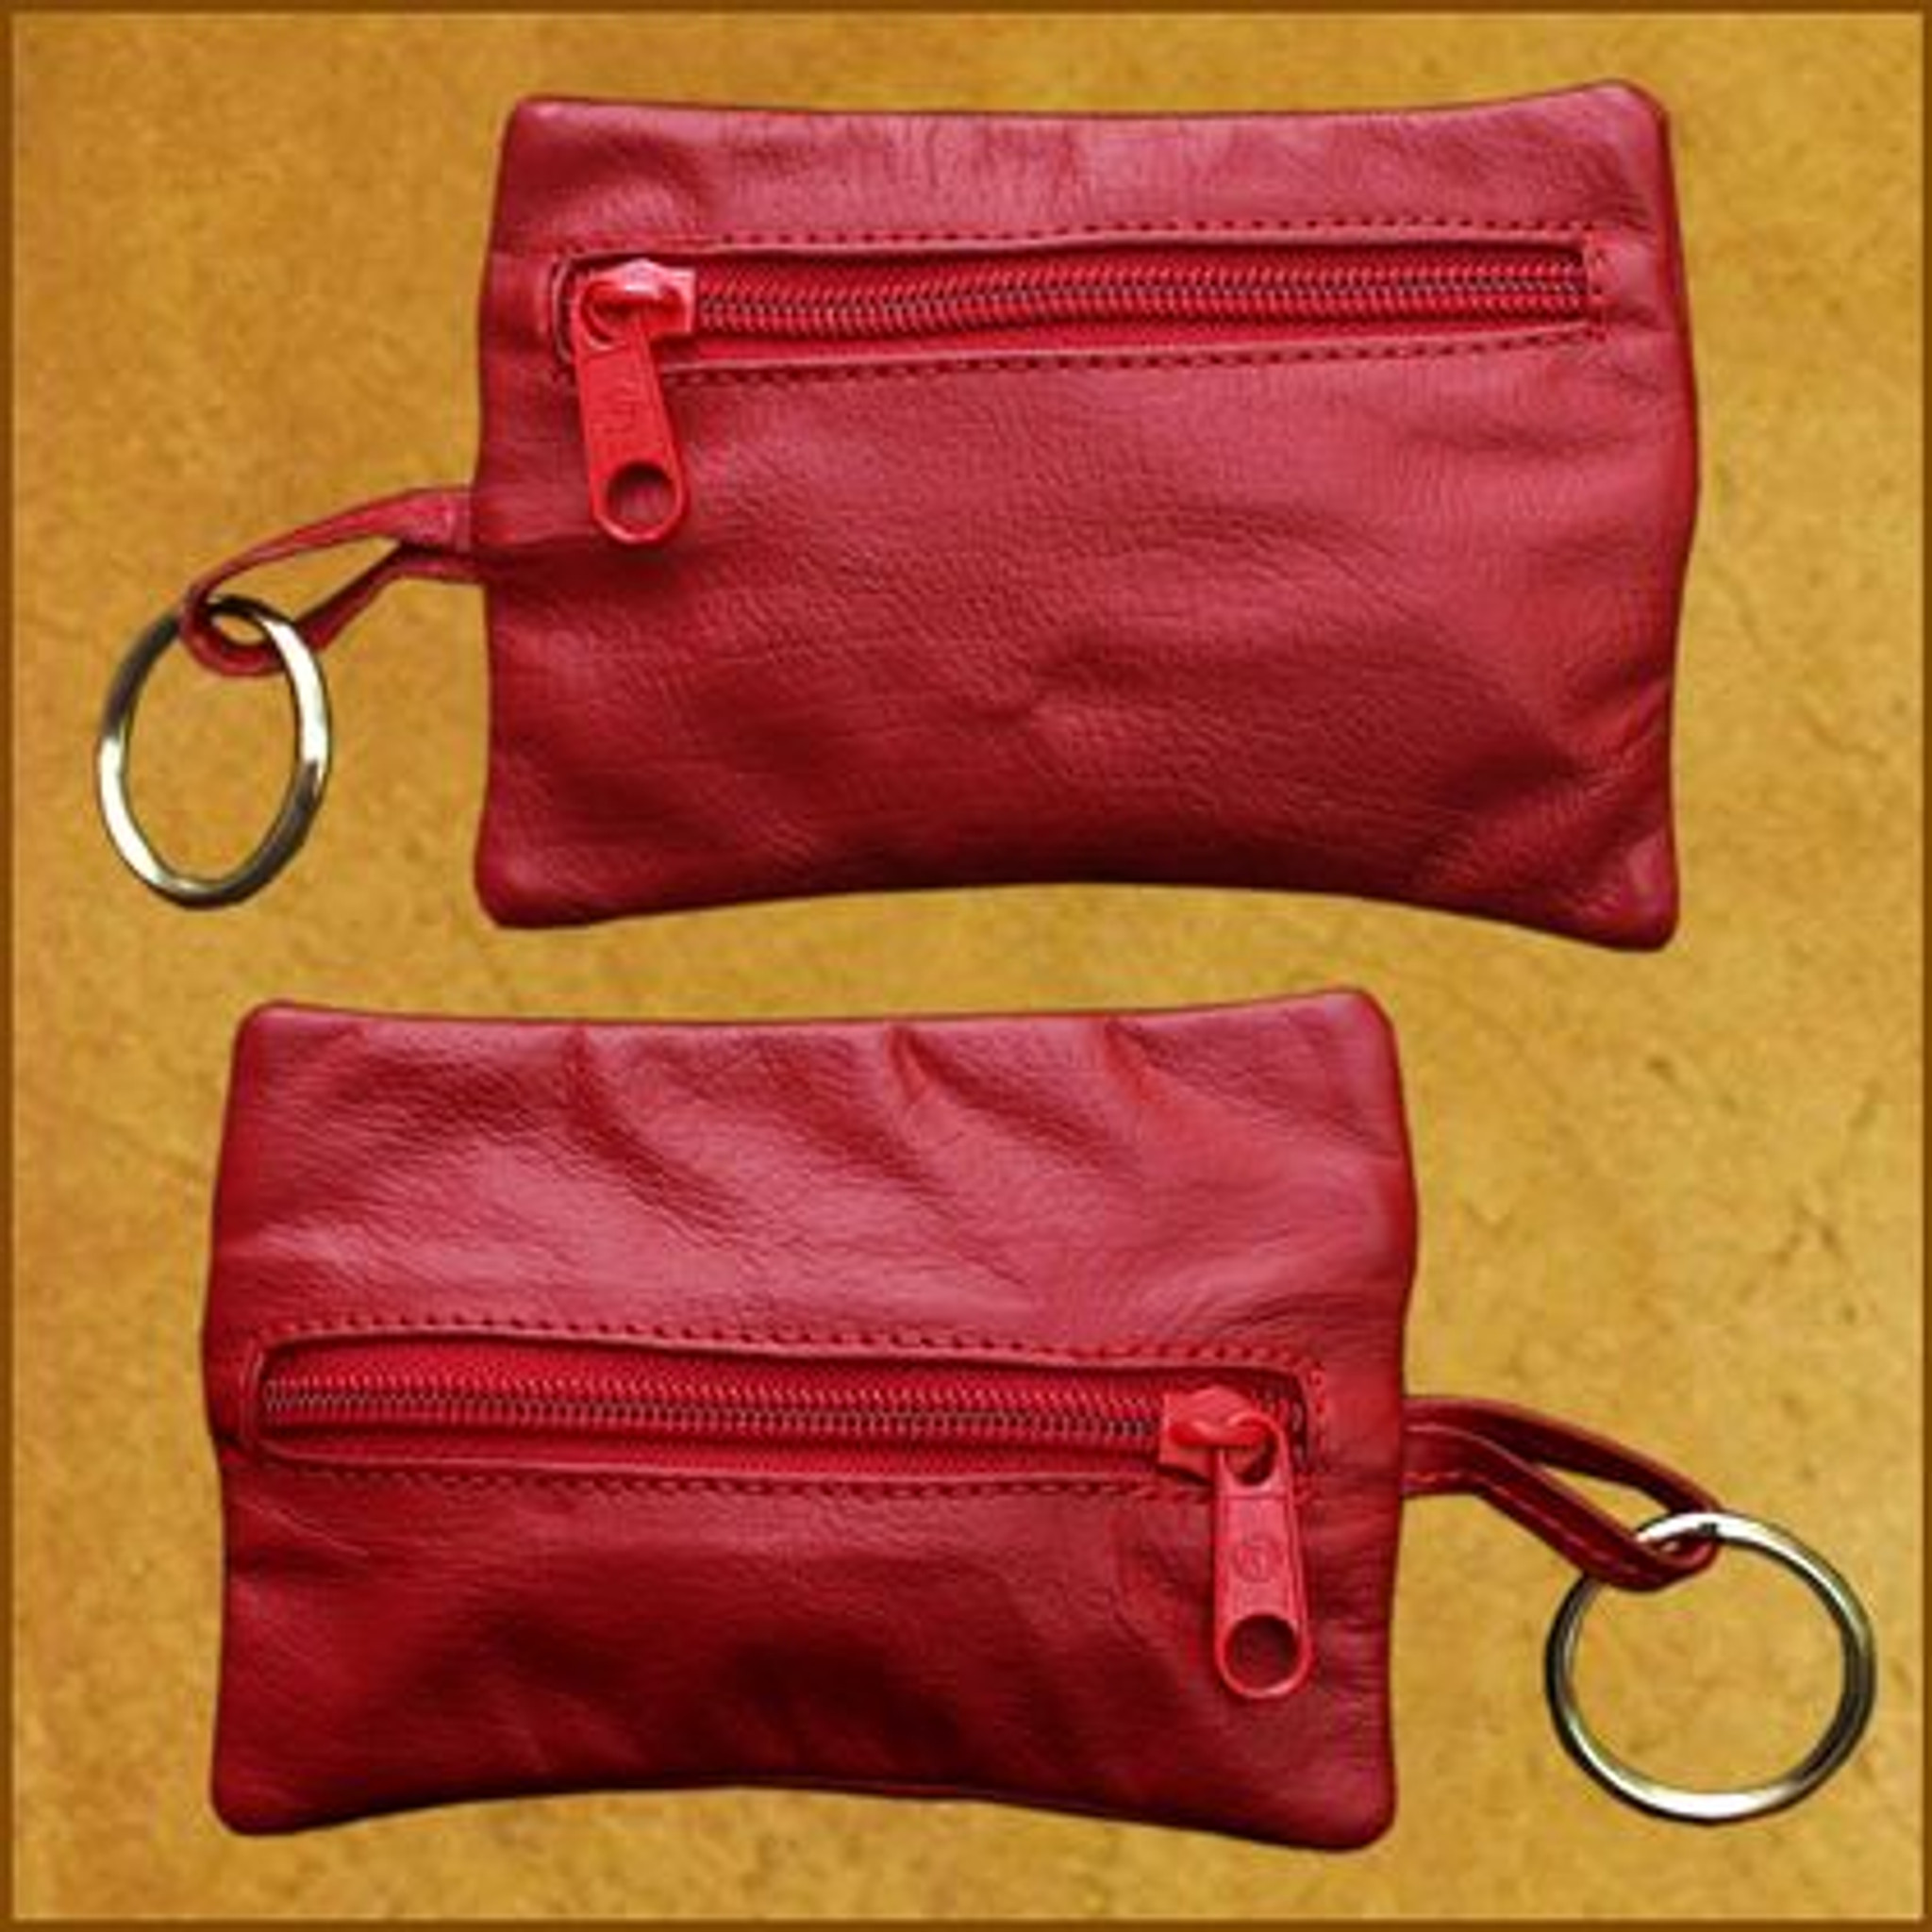 Premium Quality Real Leather Small Coin Purse Pouch Key Holder Change Wallet  | eBay